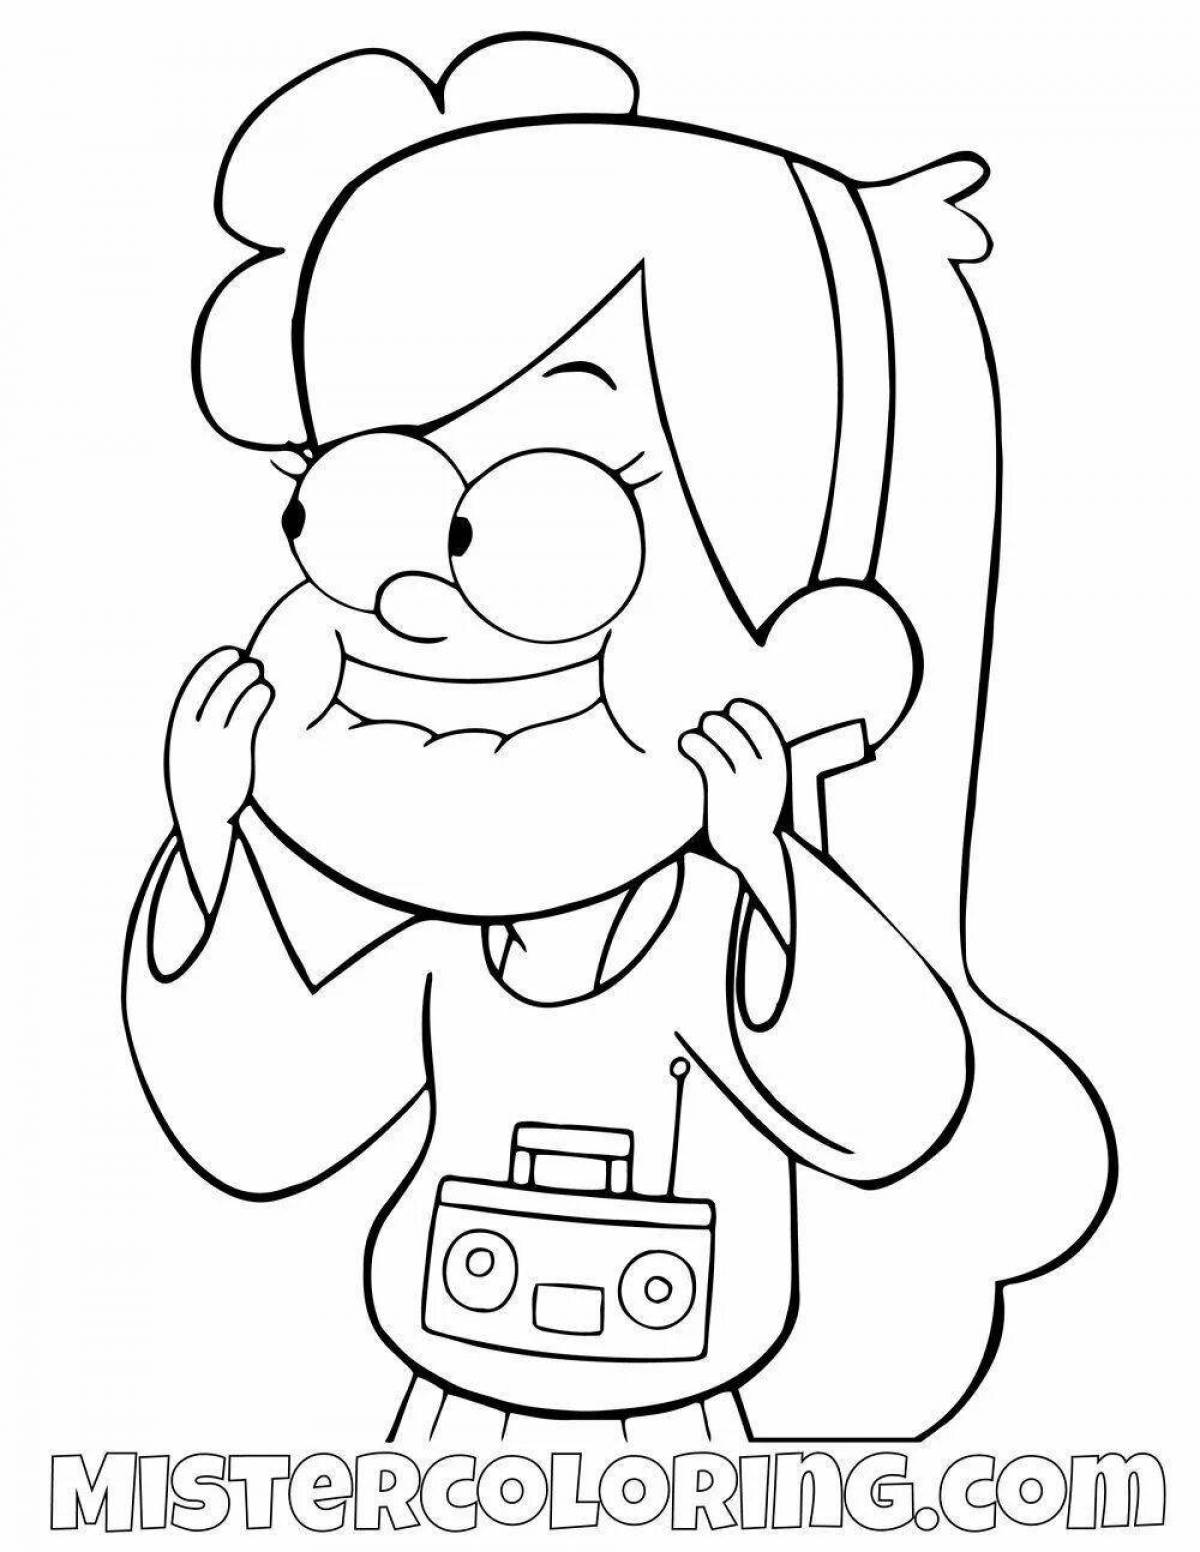 Luminous mabel and chubby coloring page